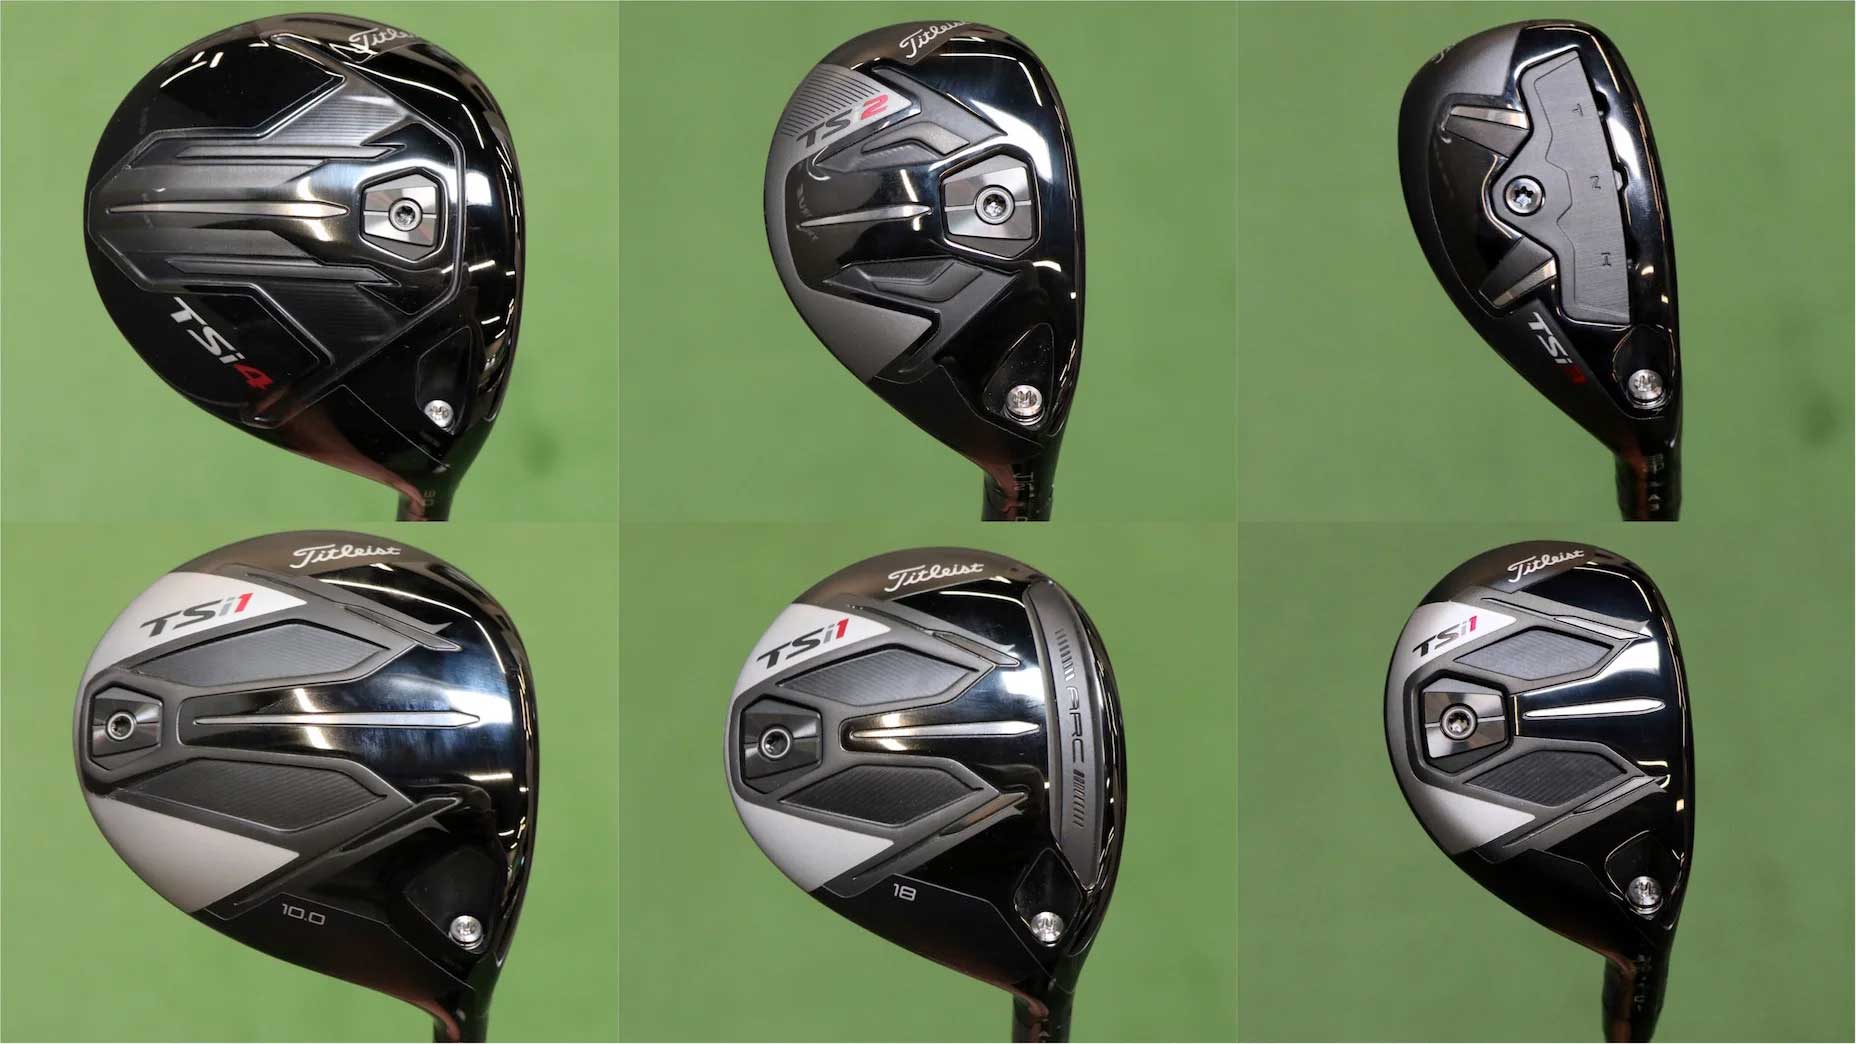 Honma want you to 'Gain Speed' with new drivers, fairway woods, irons and  hybrids - Today's Golfer